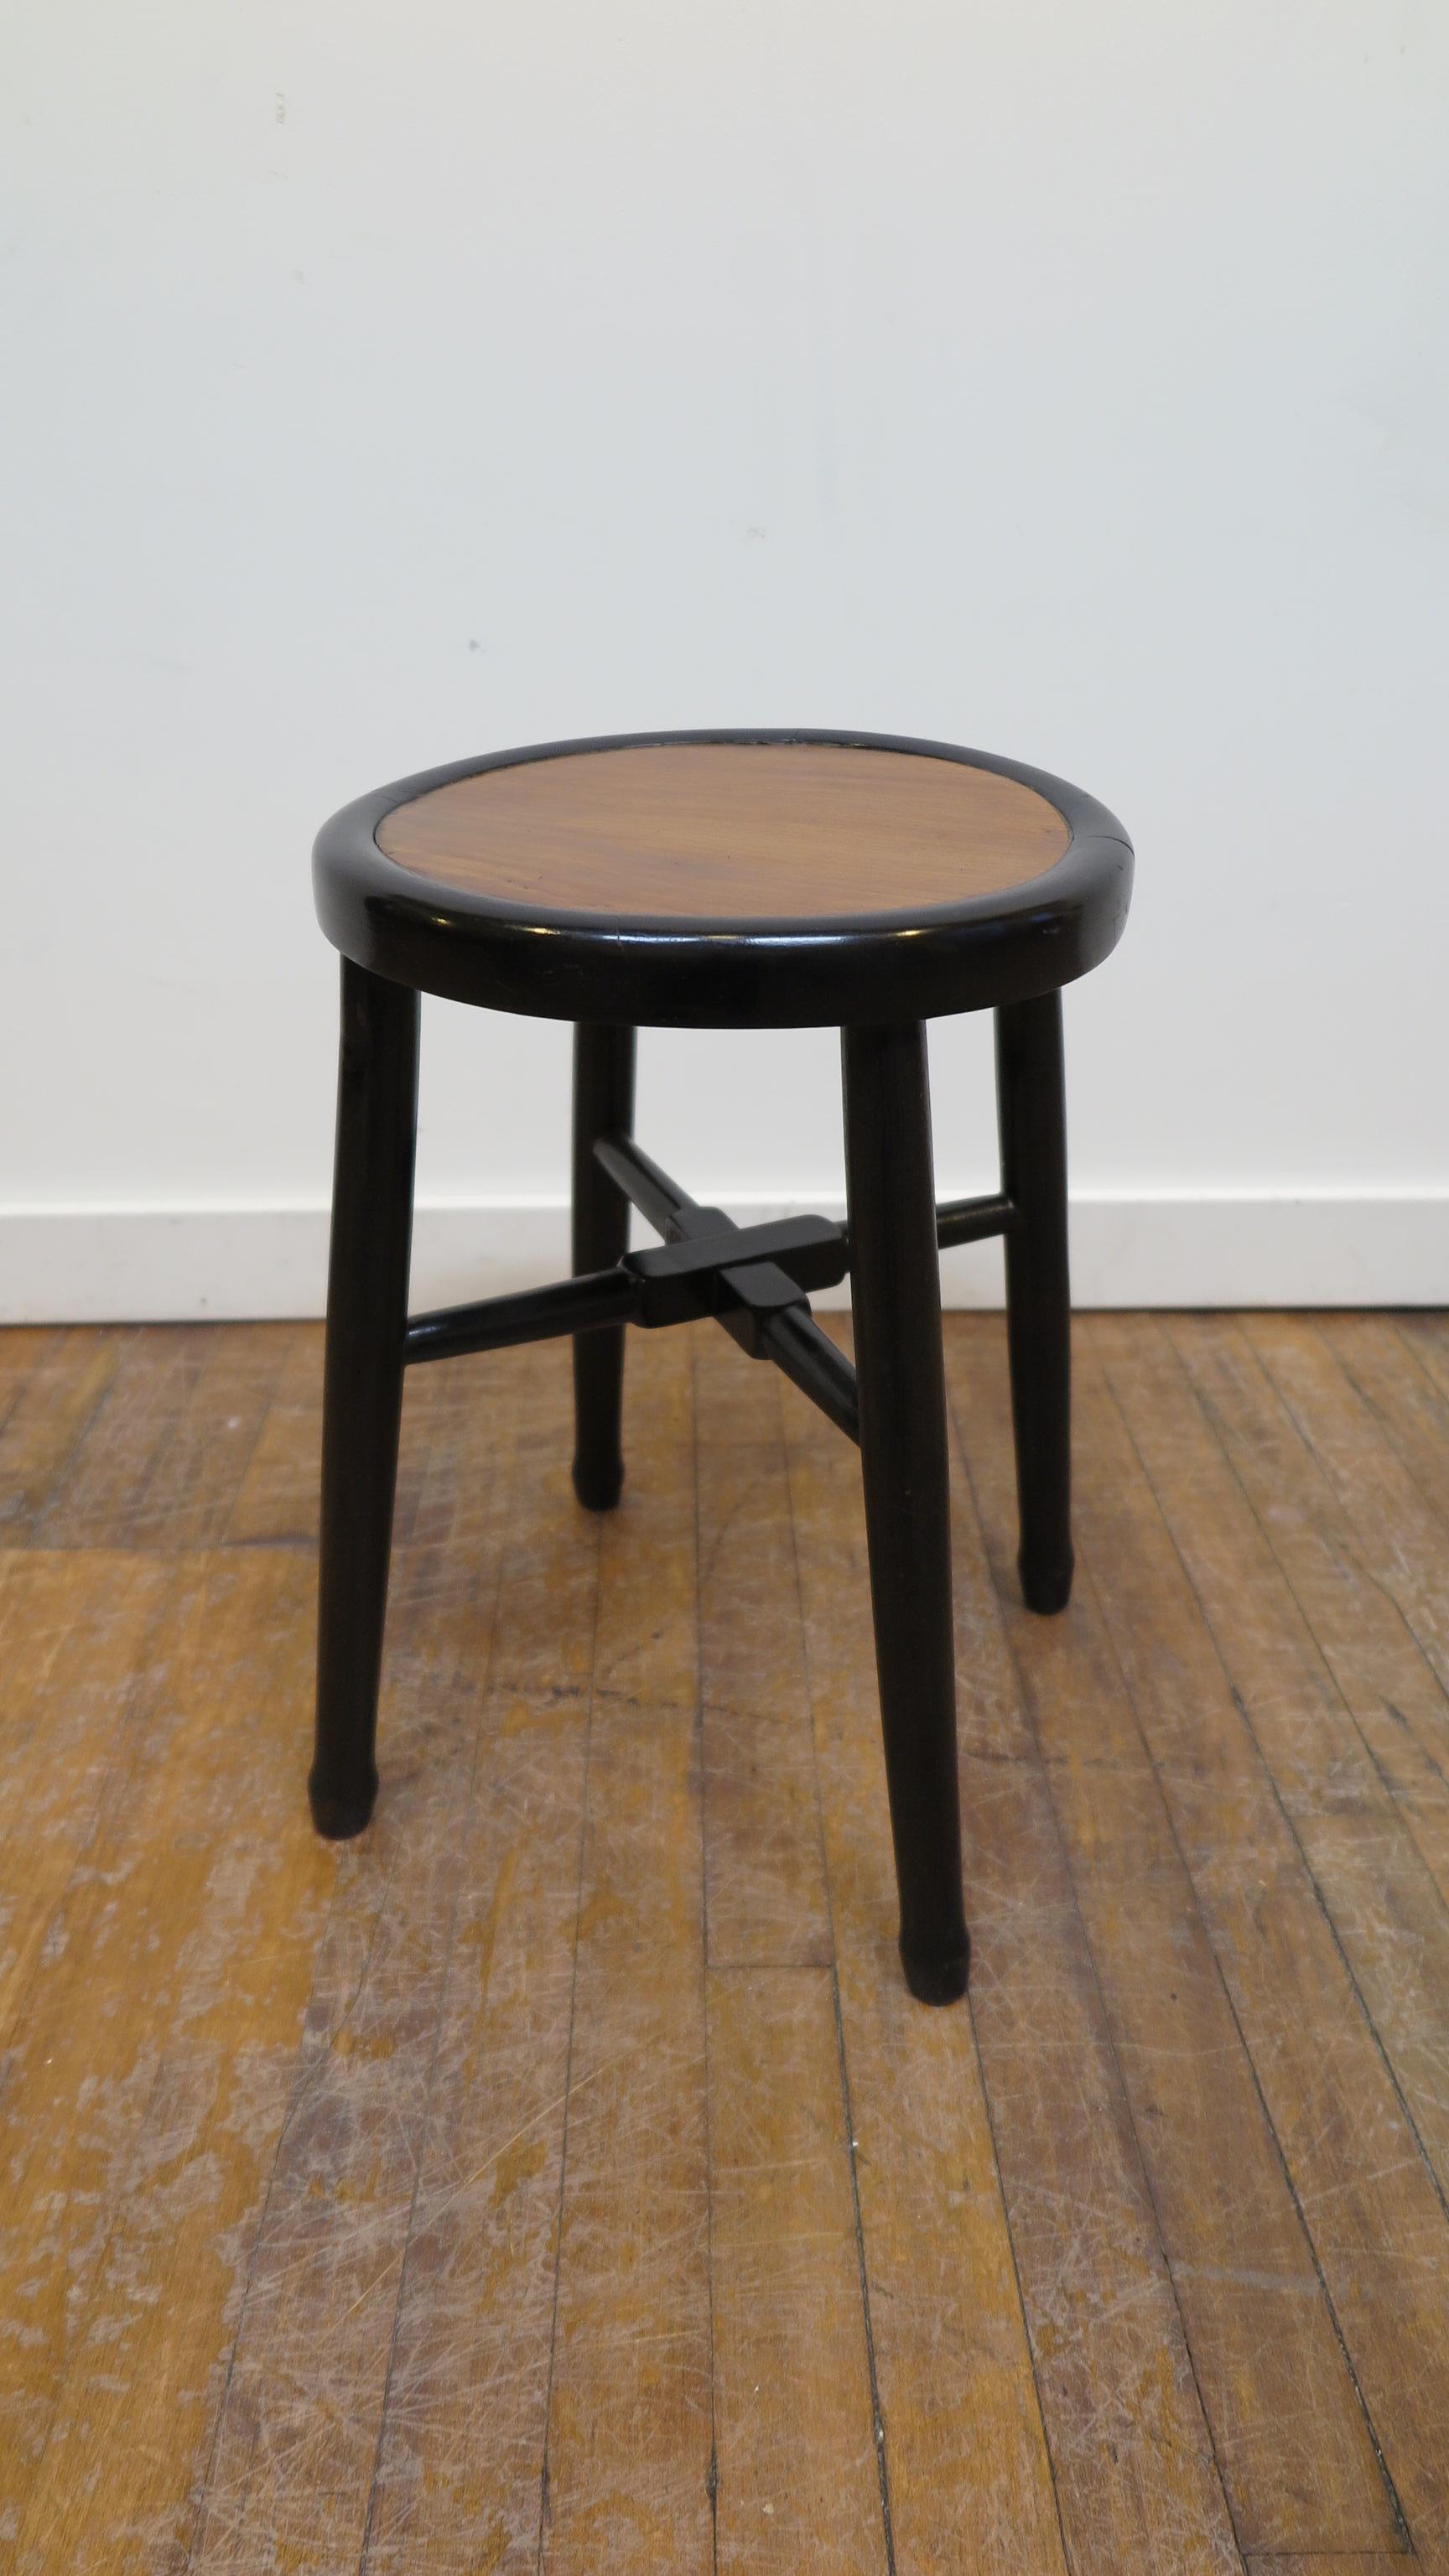 Art Deco round stool side table of elm wood. Black lacquer body with elm top showcasing a brilliant contrast of natural color with the black Lacquer. In very good condition. Last two pictures are of the joining seam of the joinery detail for the